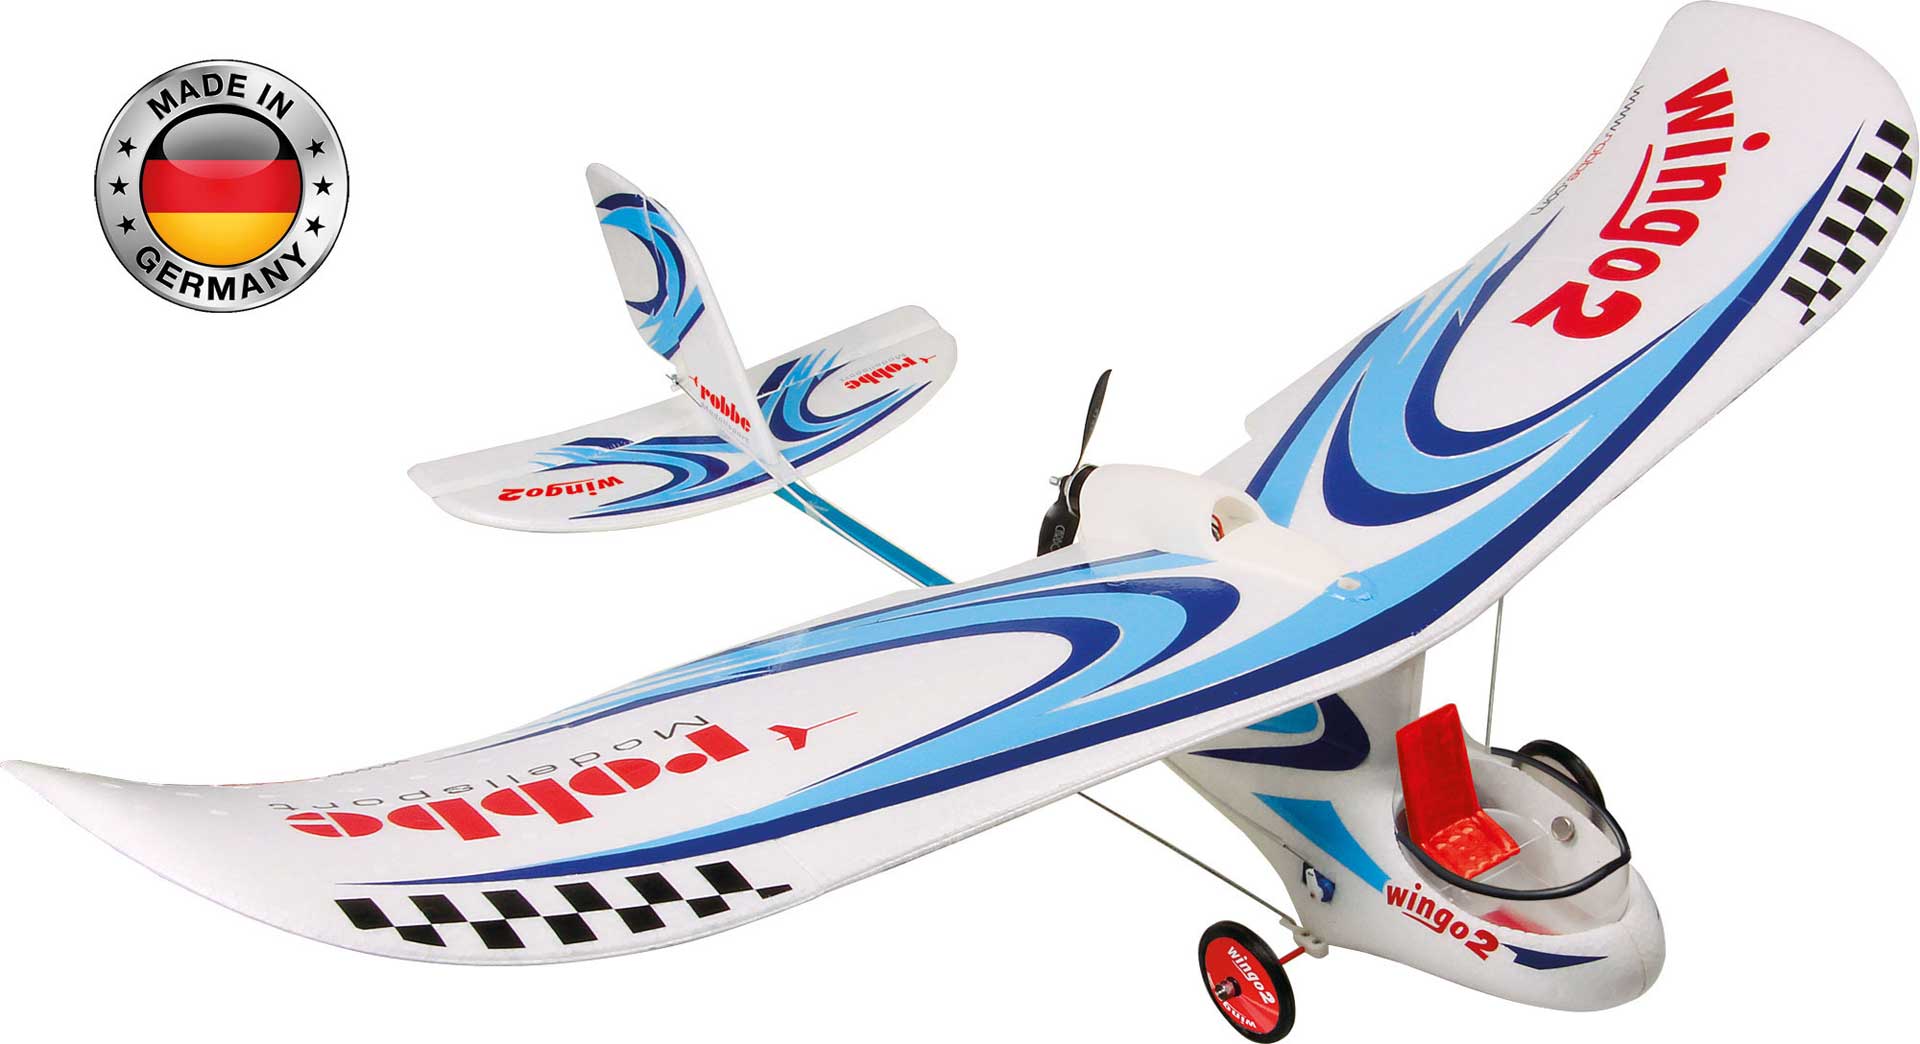 Robbe Modellsport WINGO 2 PNP "you can fly" pre-assembled with brushless motor, controller & servo